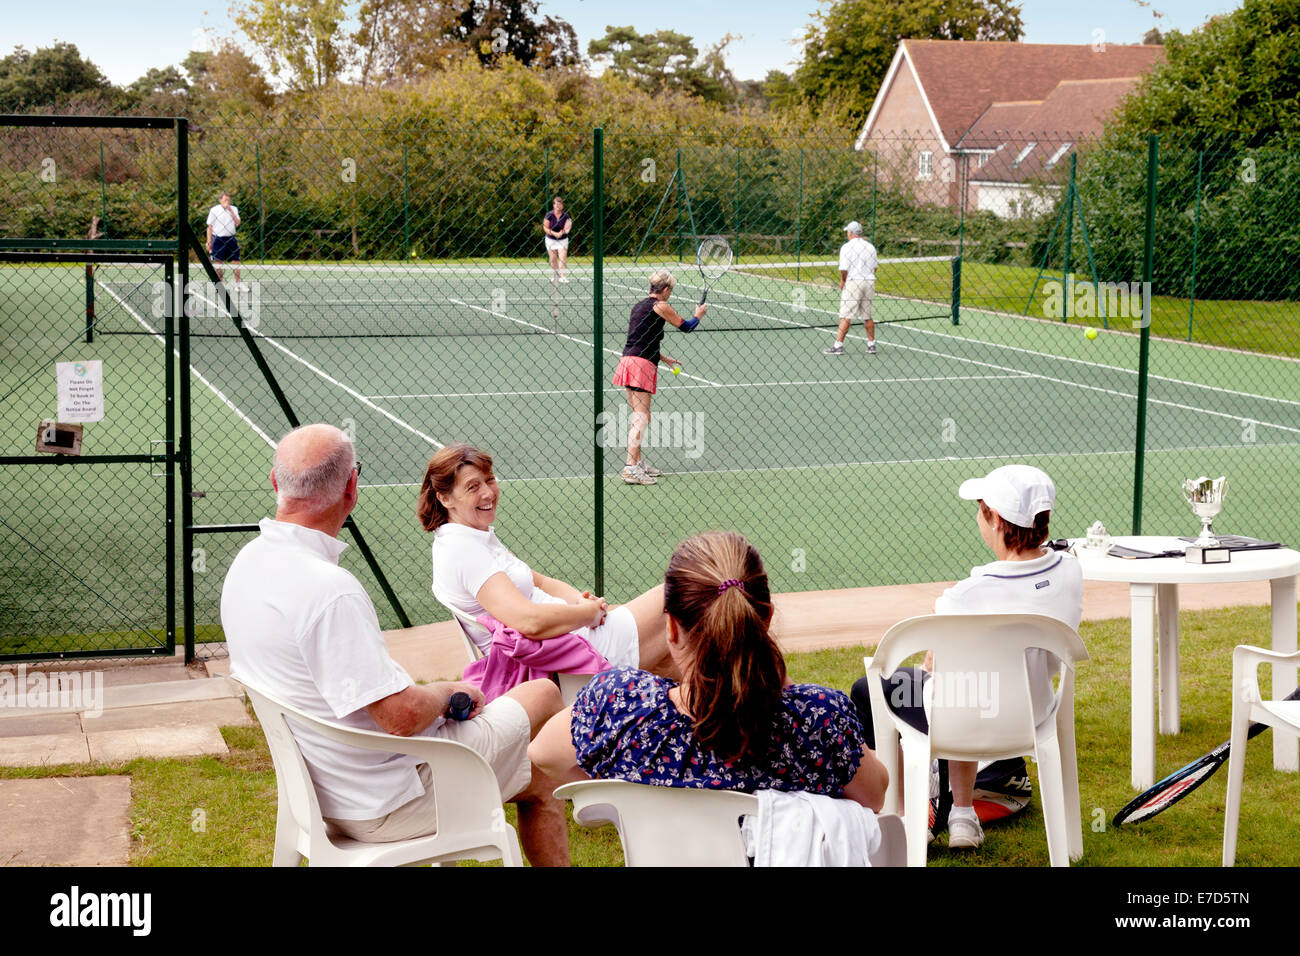 People playing tennis at a local town tennis club, URC tennis club,  Newmarket Suffolk UK Stock Photo - Alamy